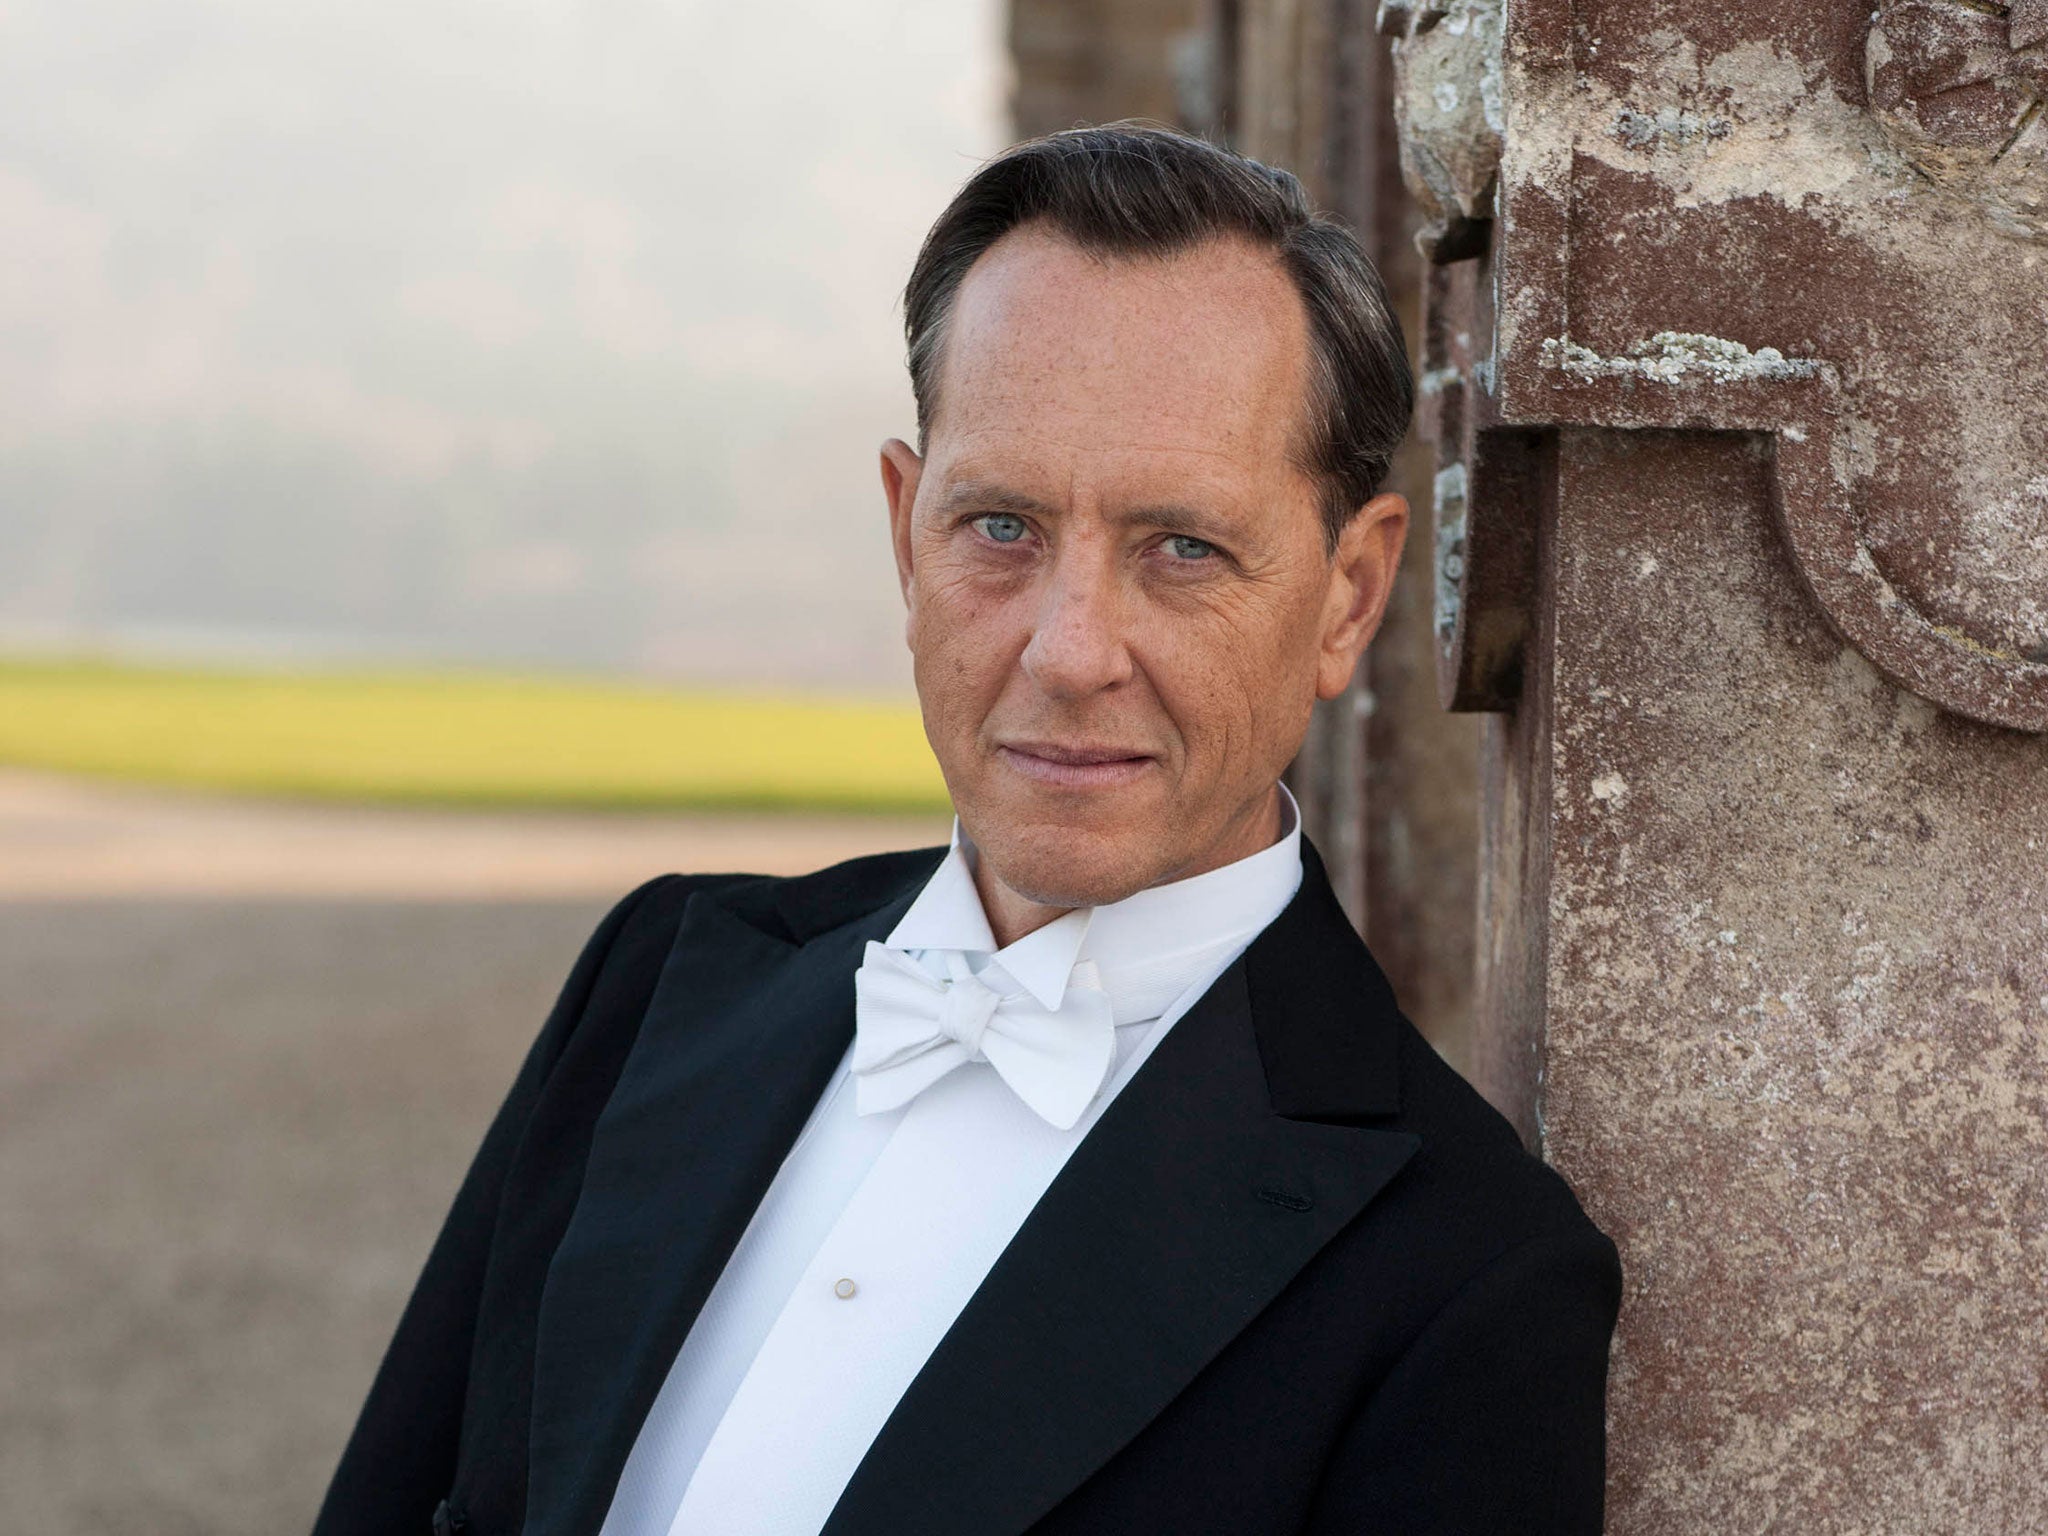 Those seeking escapism from modern-day woes in TV’s Downton Abbey were brought back to reality with a jolt when Lord Grantham angrily condemned the character played by Richard E Grant for 'flirting with Isis'